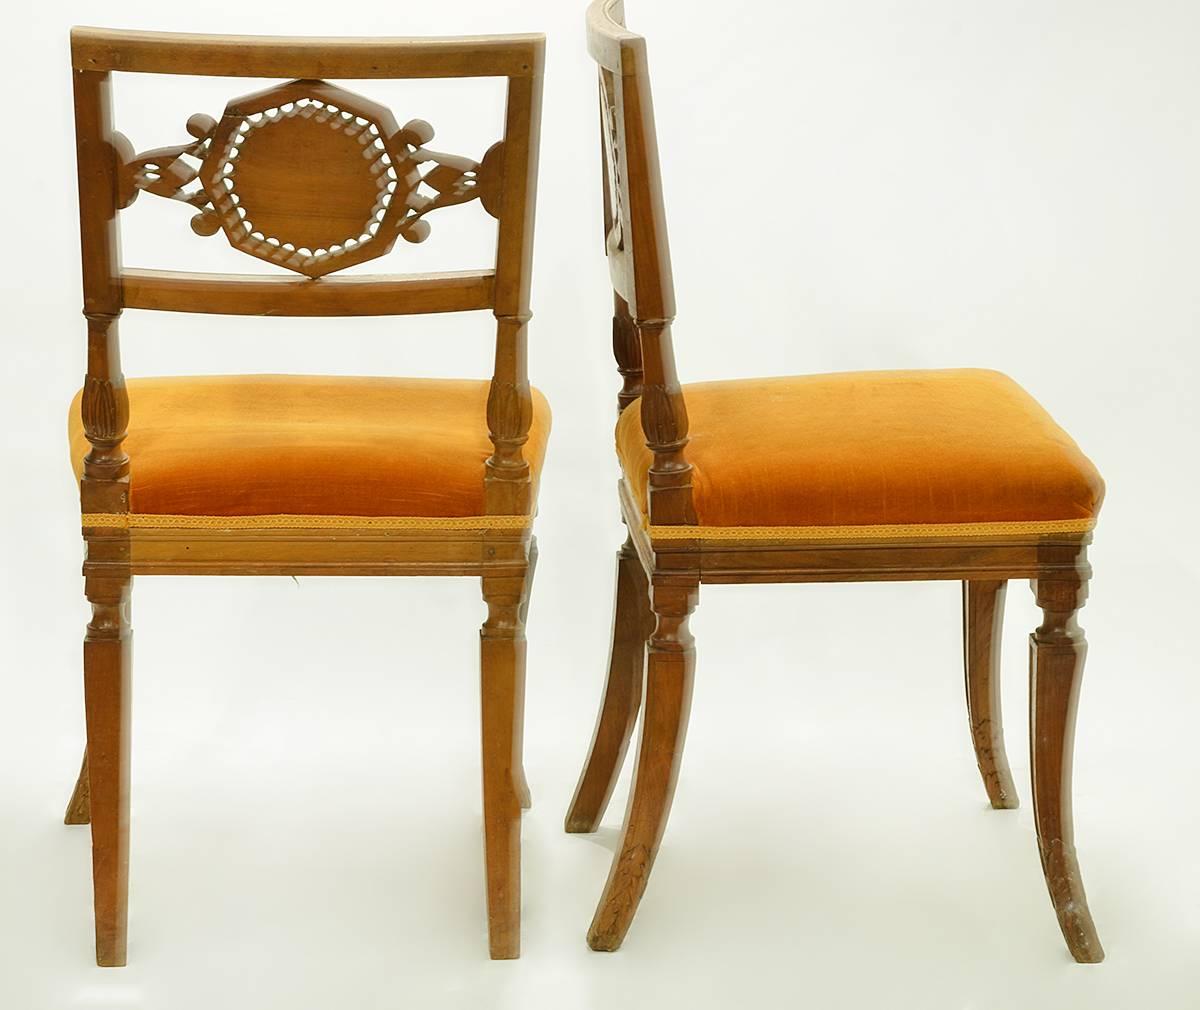 Fabric Pair of Rare Early 19th Century Italian Neoclassical Carved Walnut Side Chairs